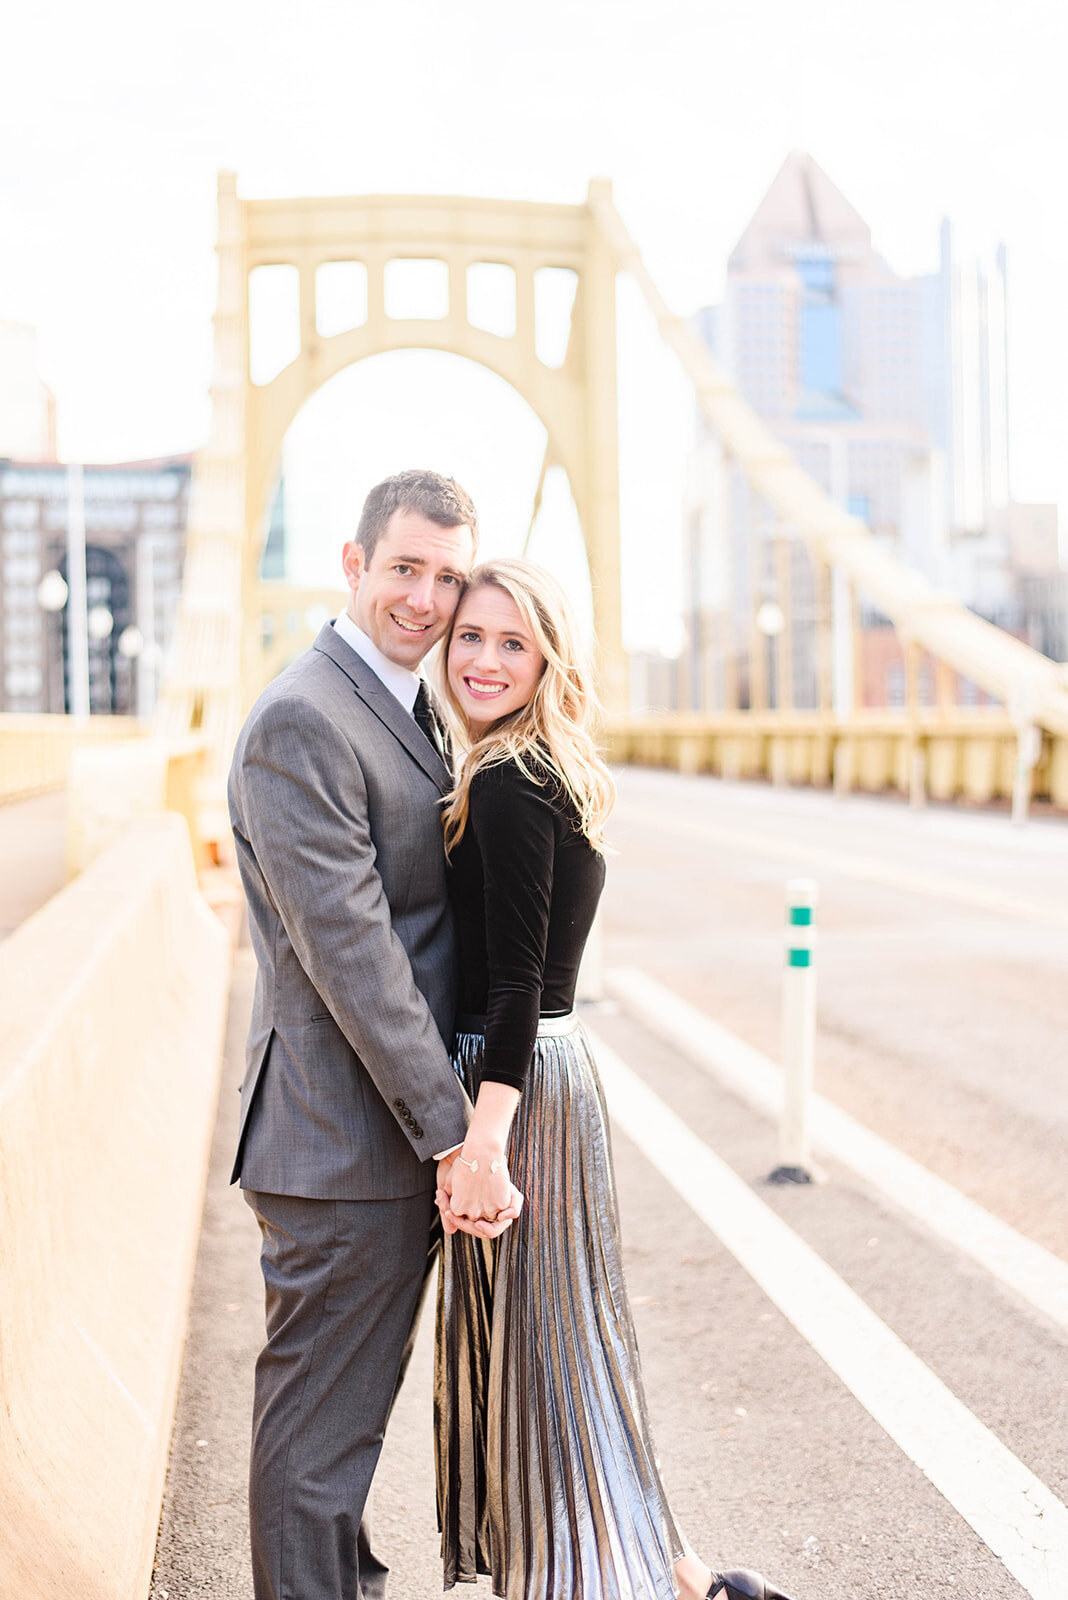 kelsey-ross-downtown-pittsburgh-engagement-photos-58